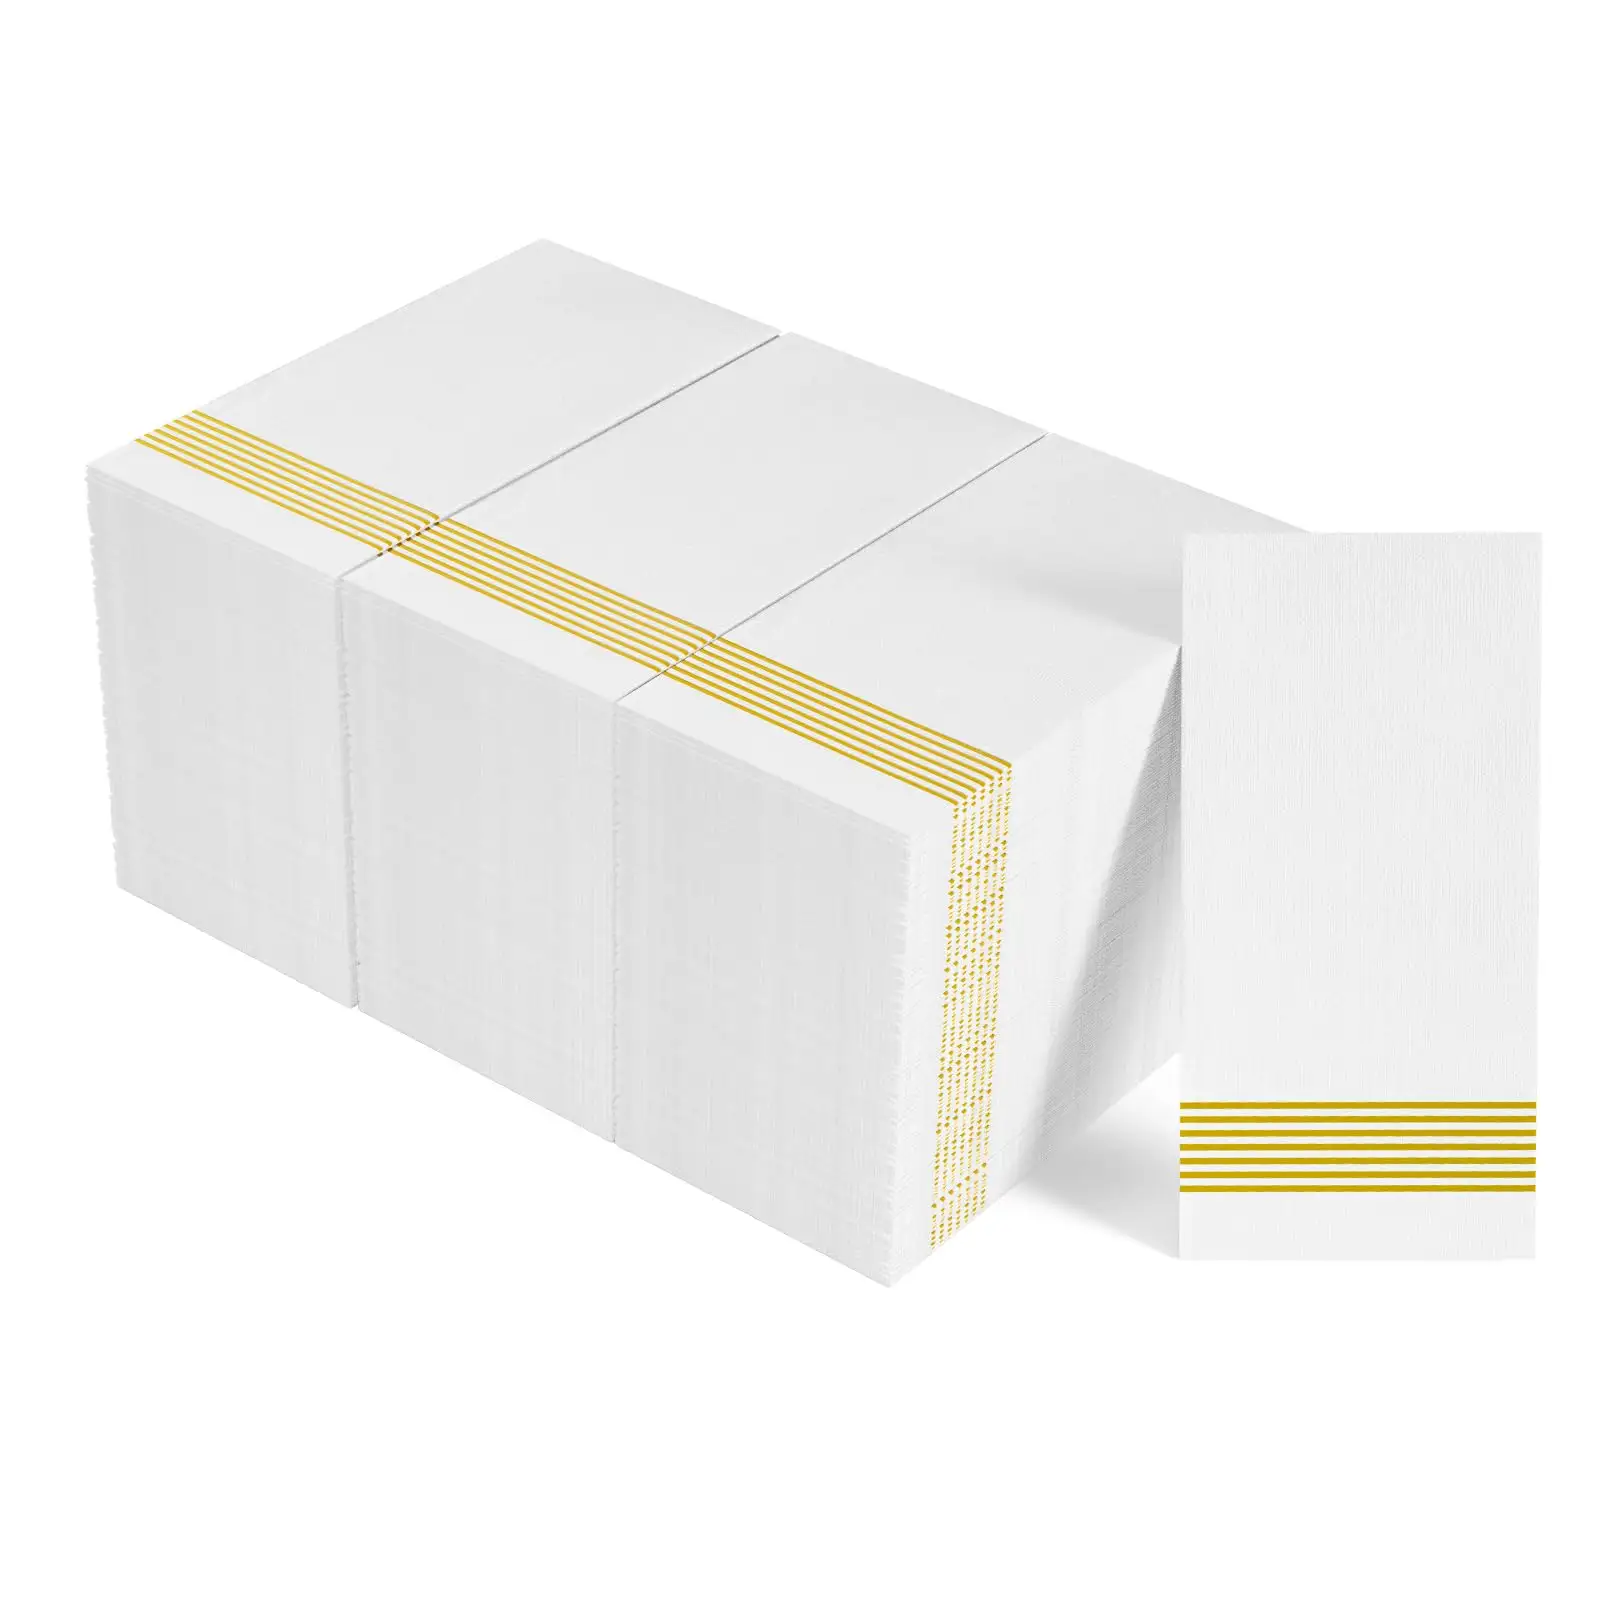 Printed 300pcs Disposable 3 ply Dinner Napkins for Table Kitchen Wedding Event Paper Napkins